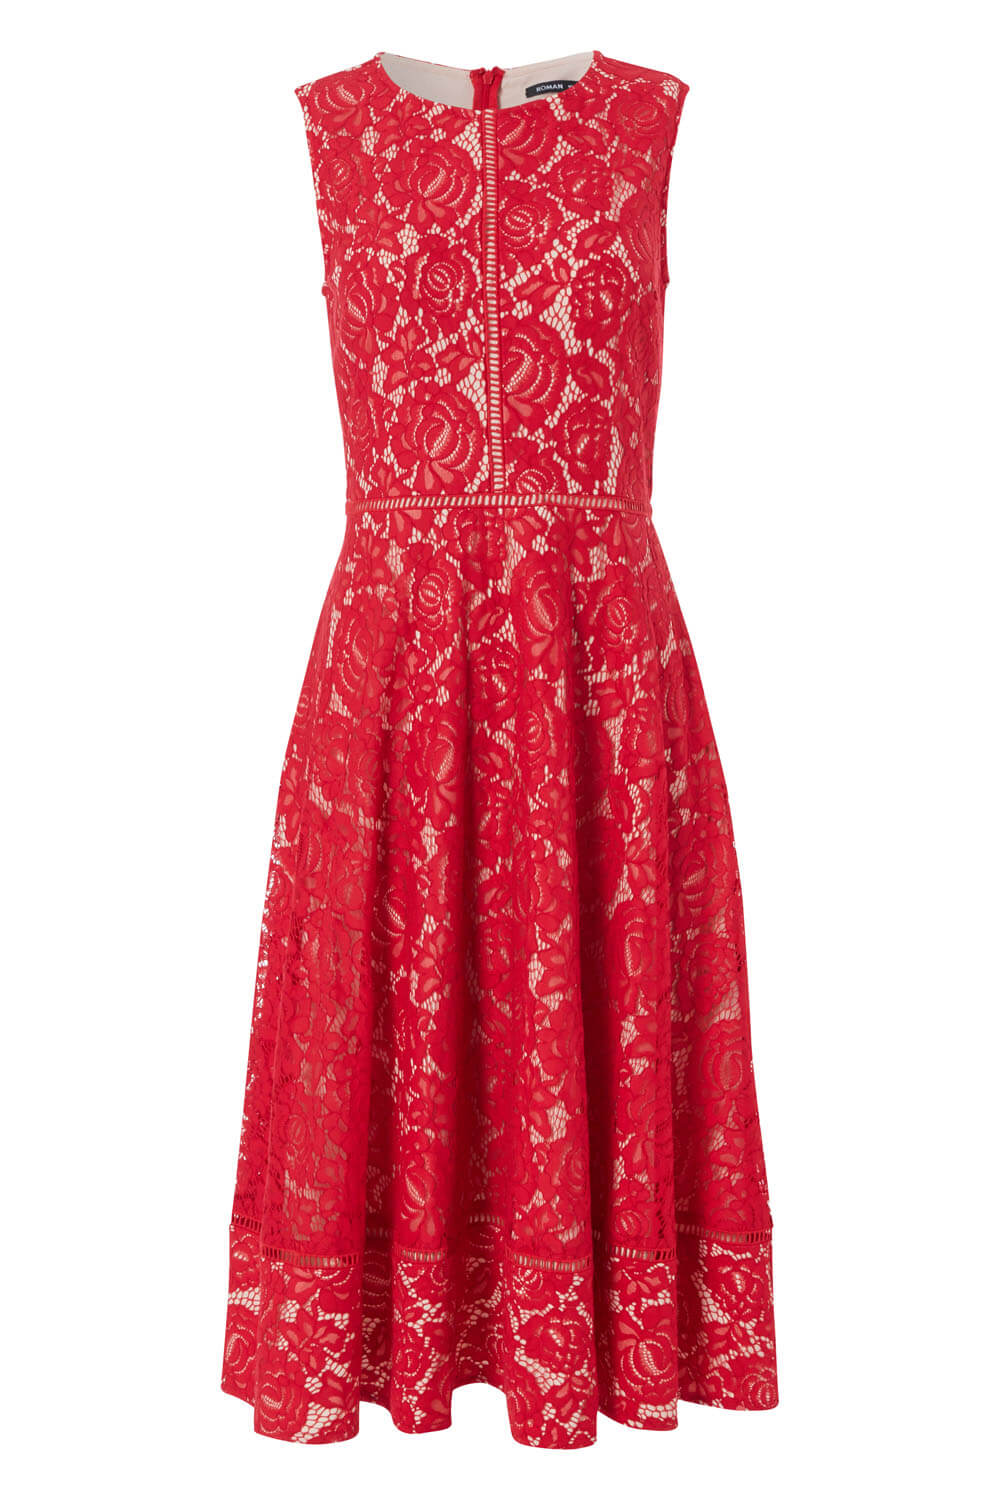 Red Fit And Flare Lace Midi Dress, Image 5 of 5